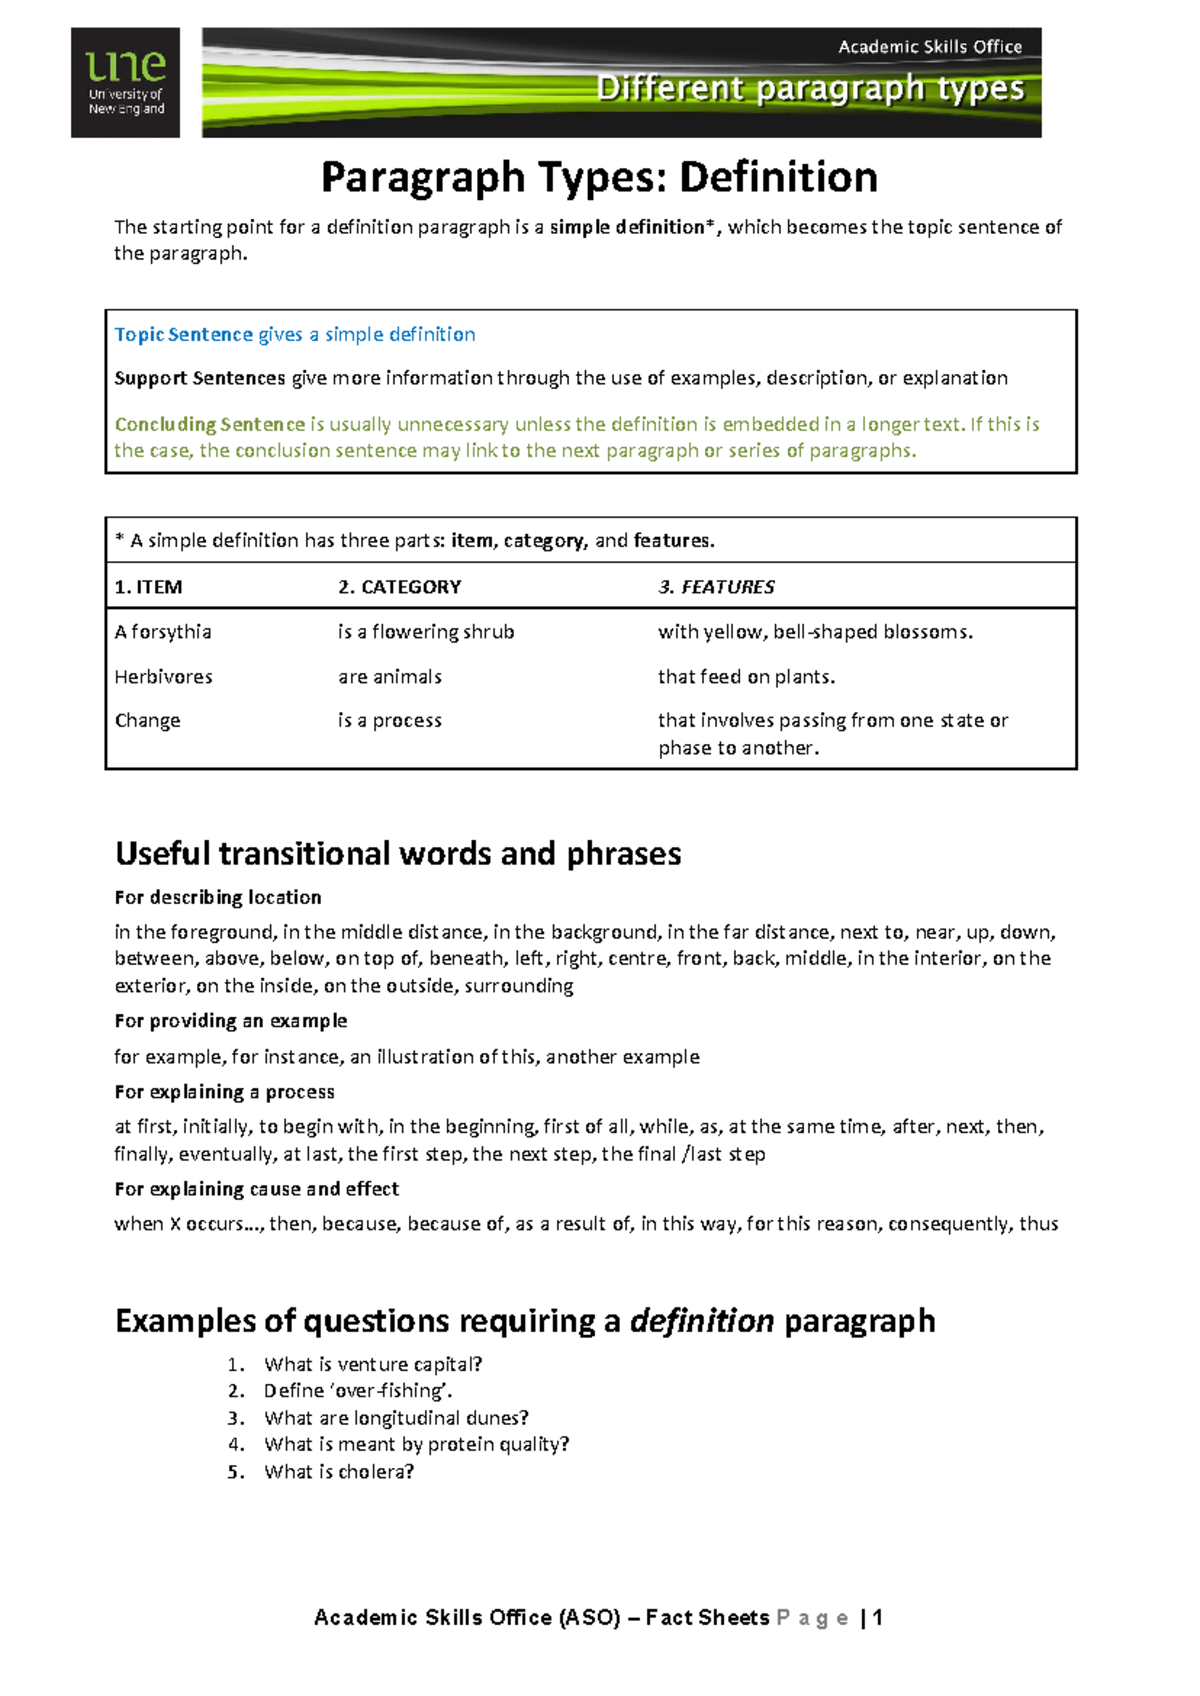 Paragraph-definition - Academic Skills Office (ASO) – Fact Sheets P a g ...